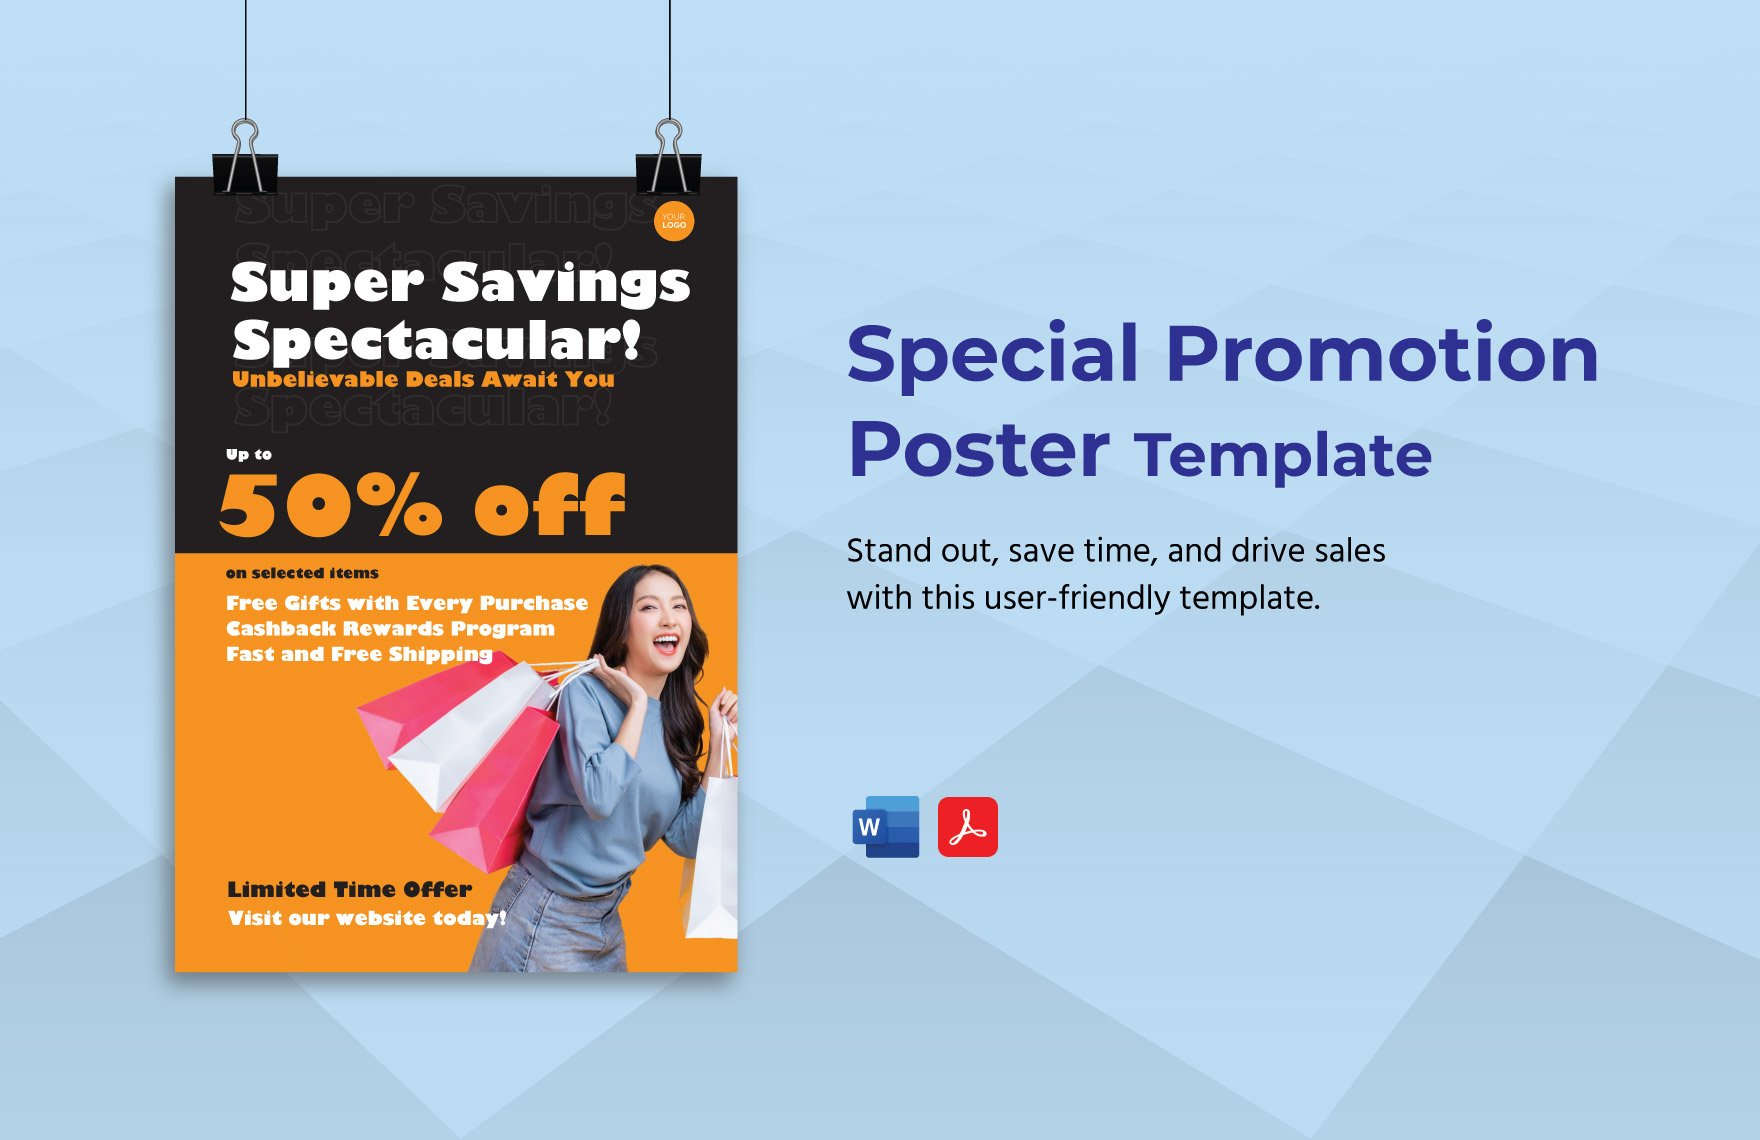 Special Promotion Poster Template